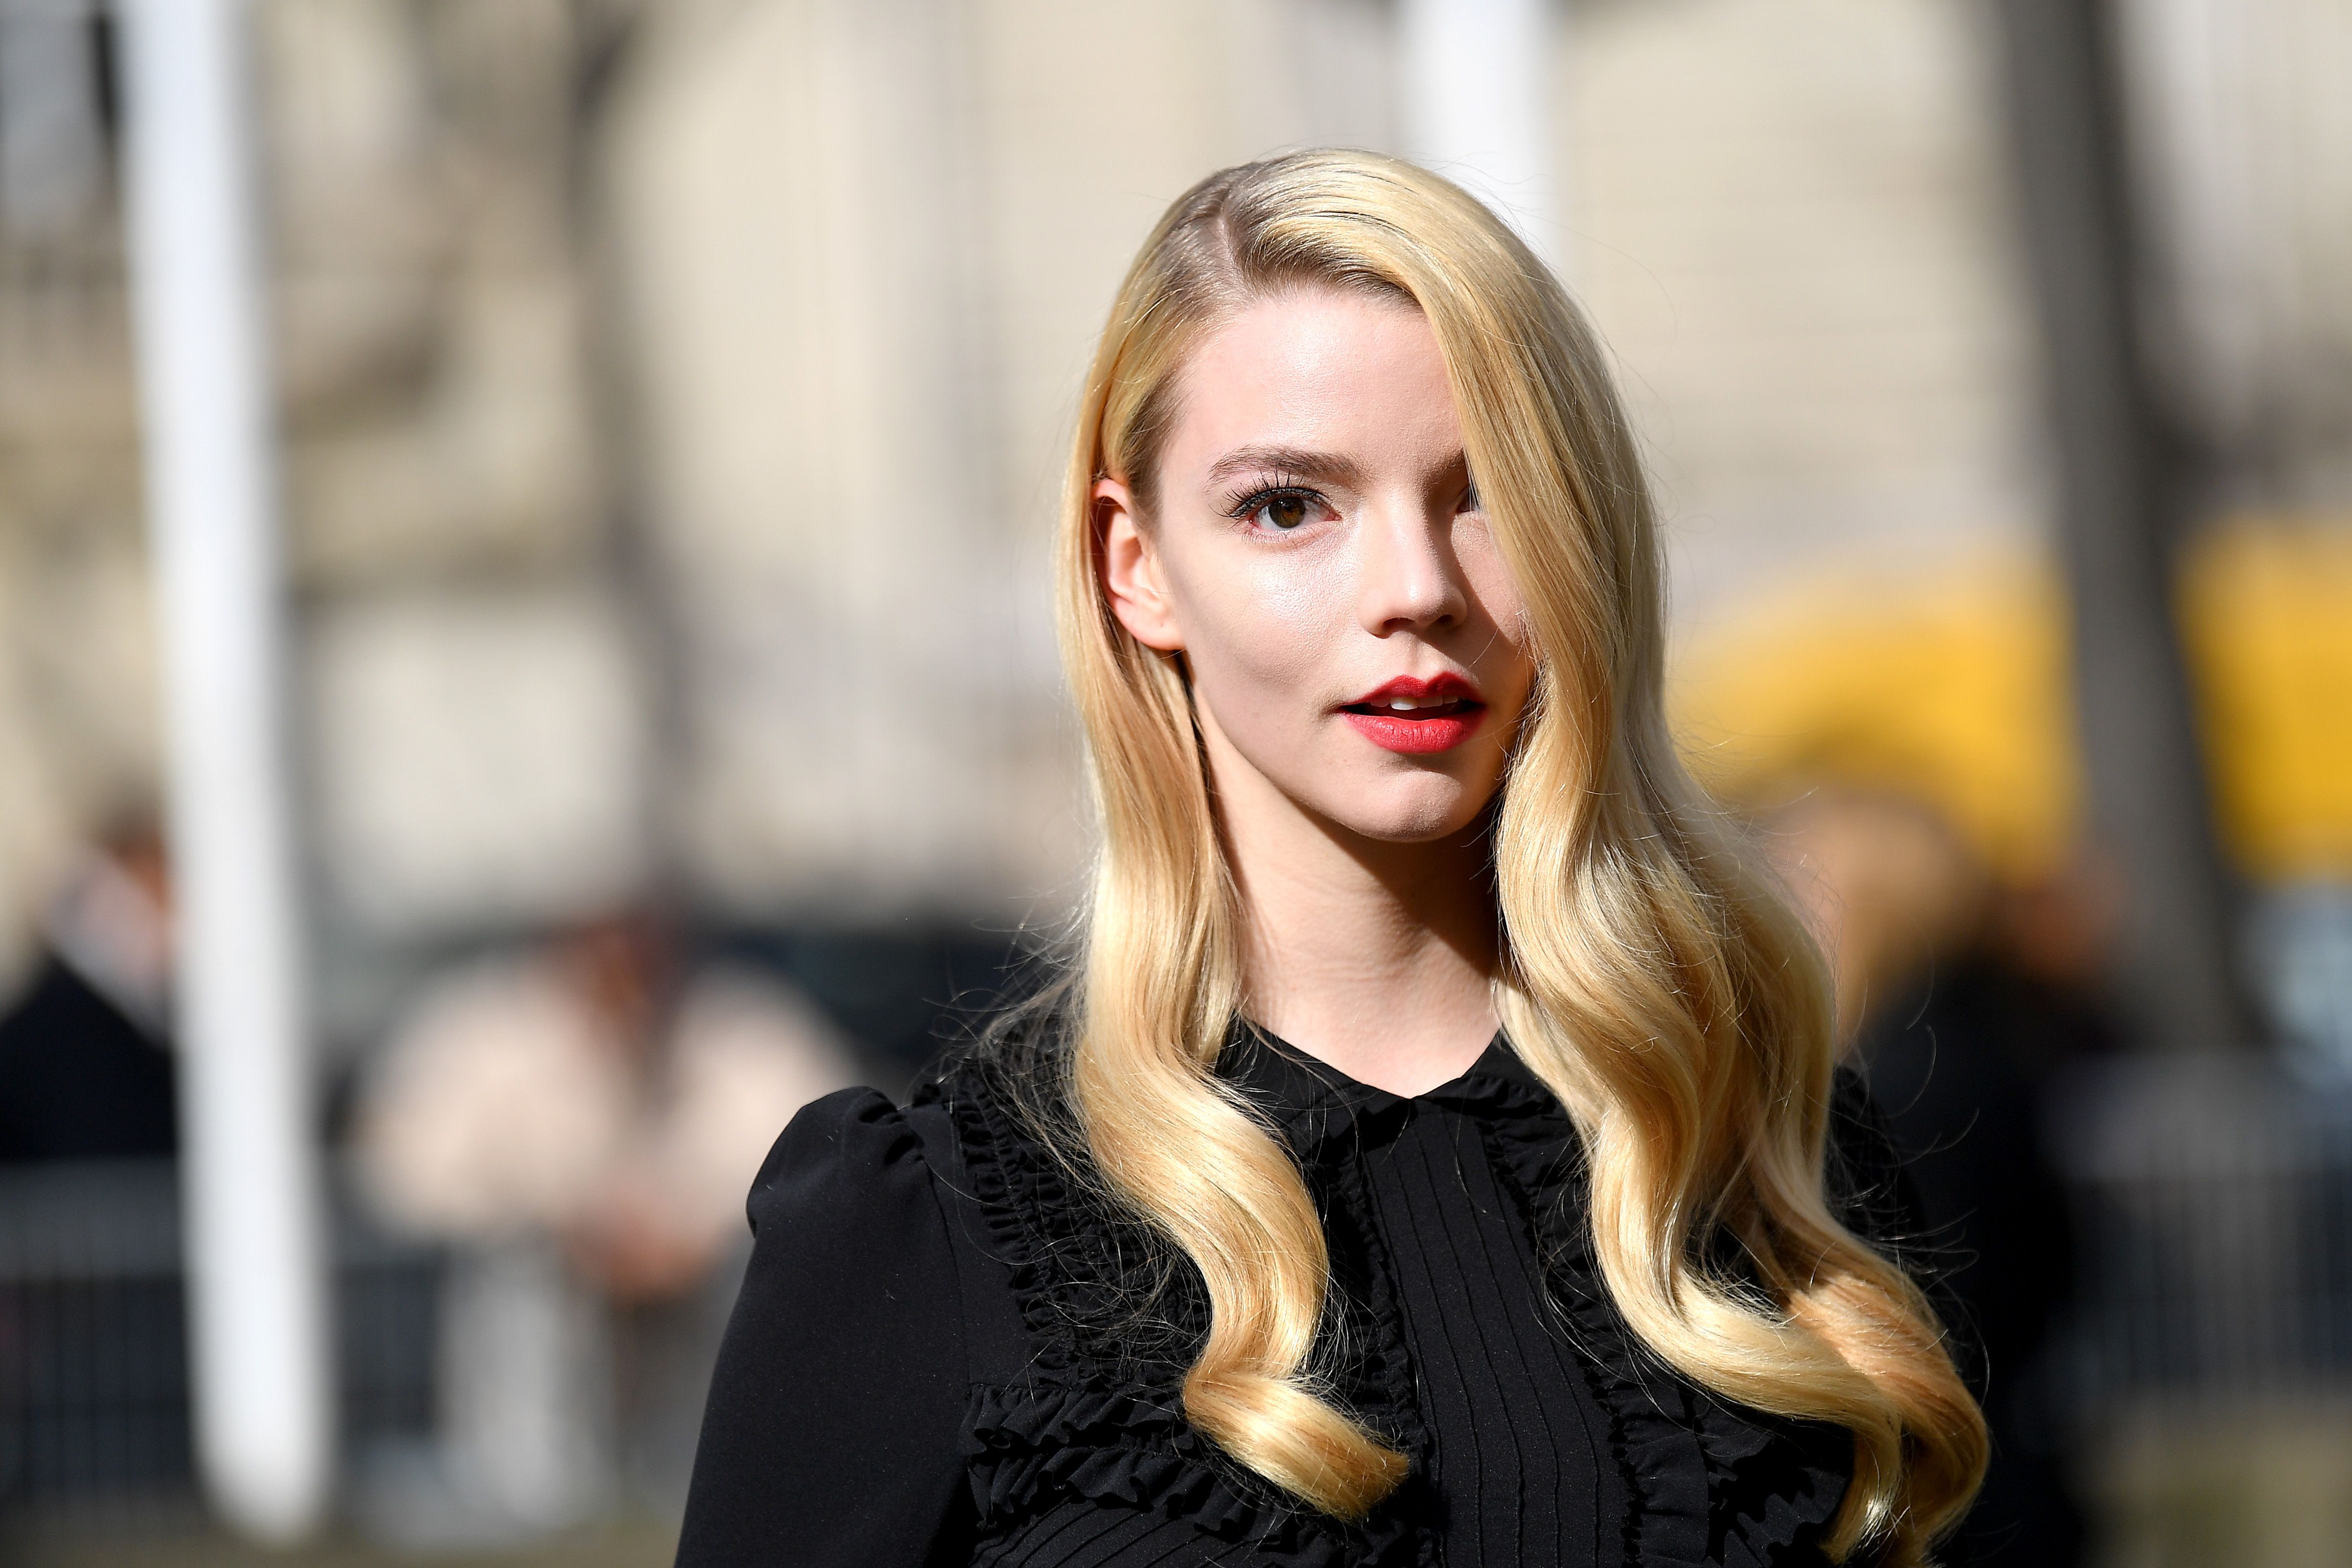 Anya Taylor-Joy at the Miu Miu show as part of the Paris Fashion Week Womenswear Fall/Winter 2020/2021 on March 03, 2020, in Paris, France | Photo: Jacopo Raule/Getty Images